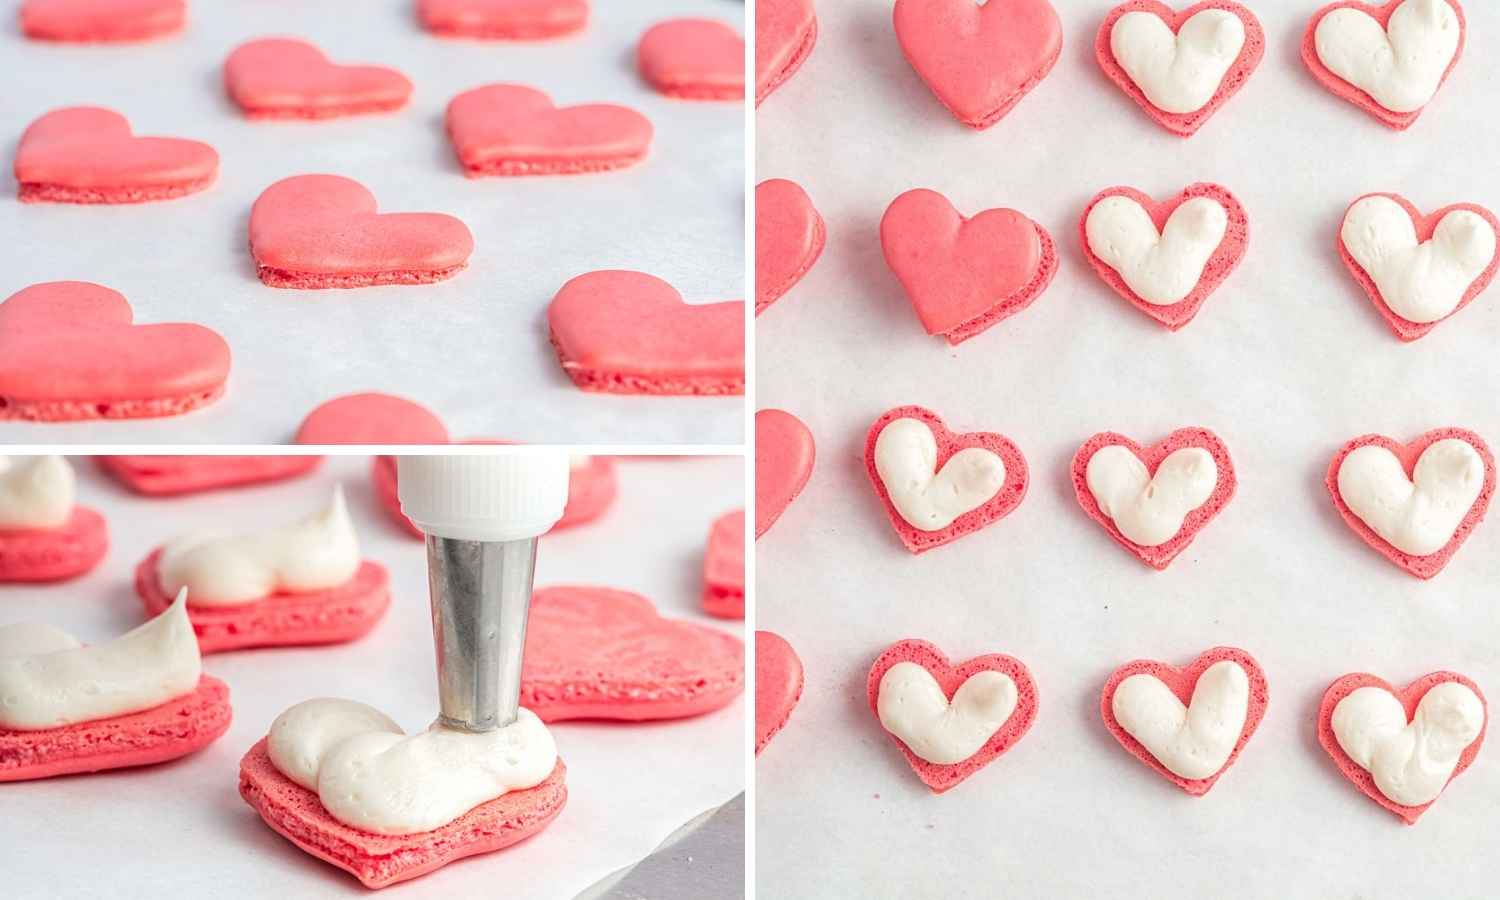 Collage of 3 images showing how to fill hear shaped macaron shells with buttercream